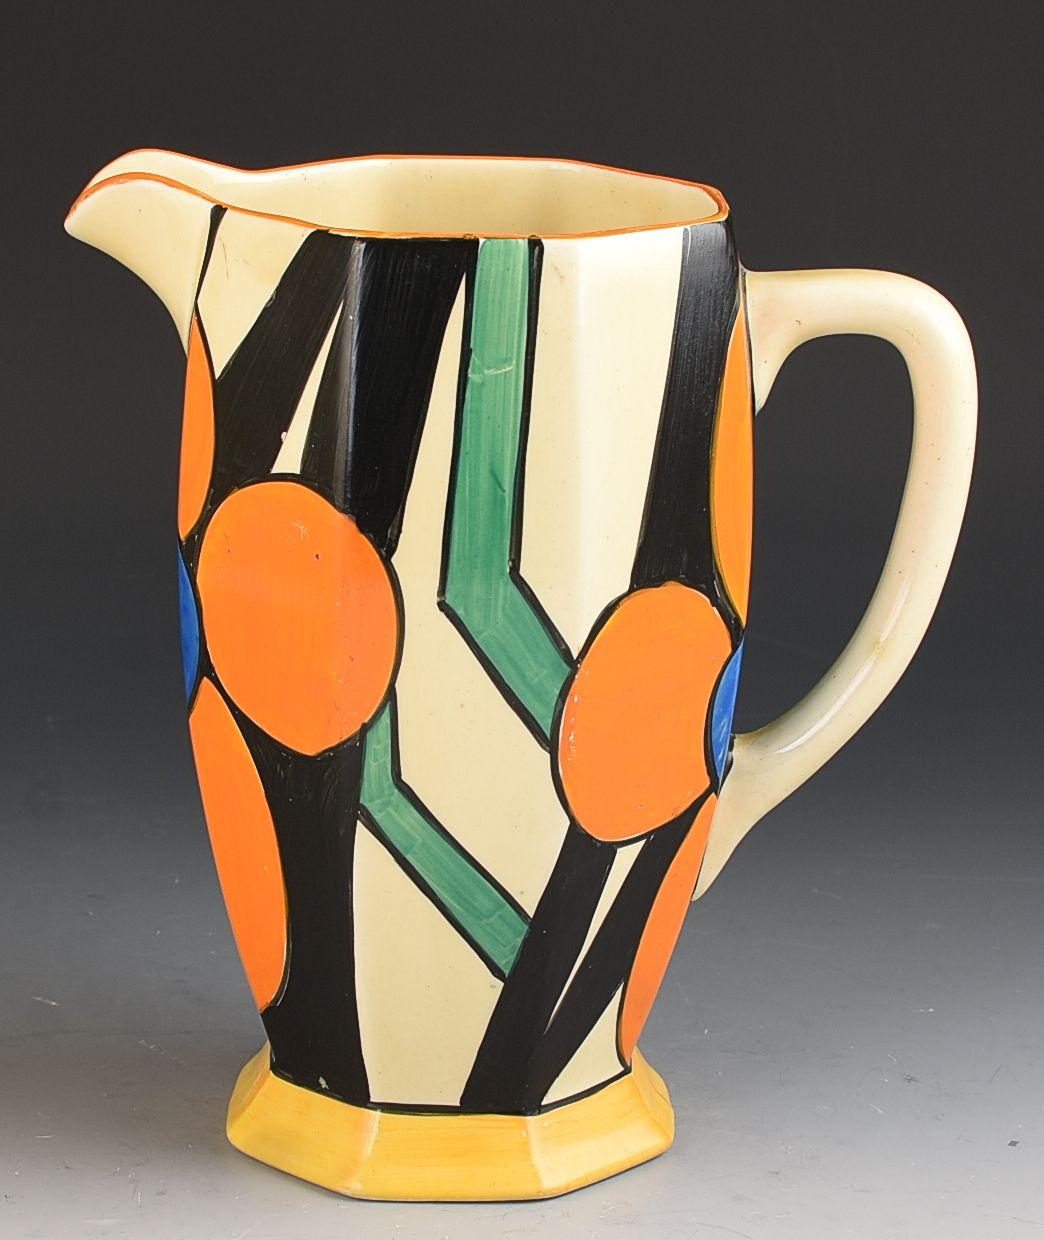 A superbly decorated Athens shape jug in Picasso Flower, a super abstract design that works amazingly on the shape. Bold decoration, repeating image and strong colours. GUARANTEED to be free from any form of damage or restoration this really is a